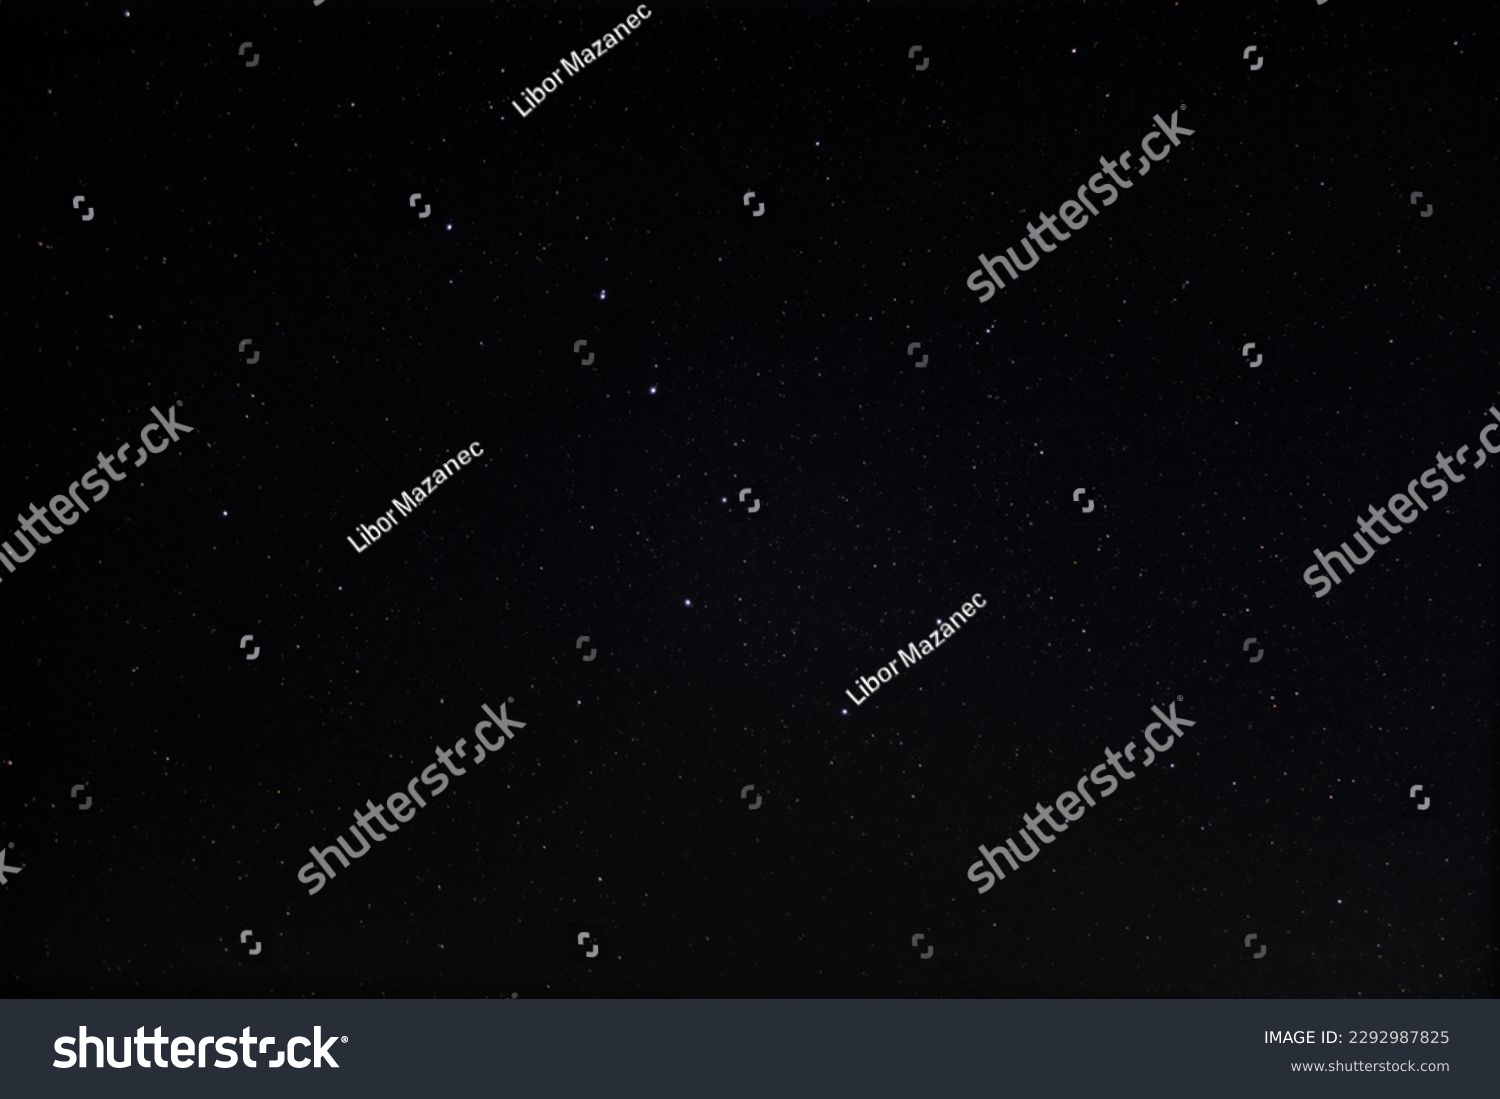 Big Dipper constellation, part of the Ursa Major. Central Czechia, Night sky at the late April #2292987825